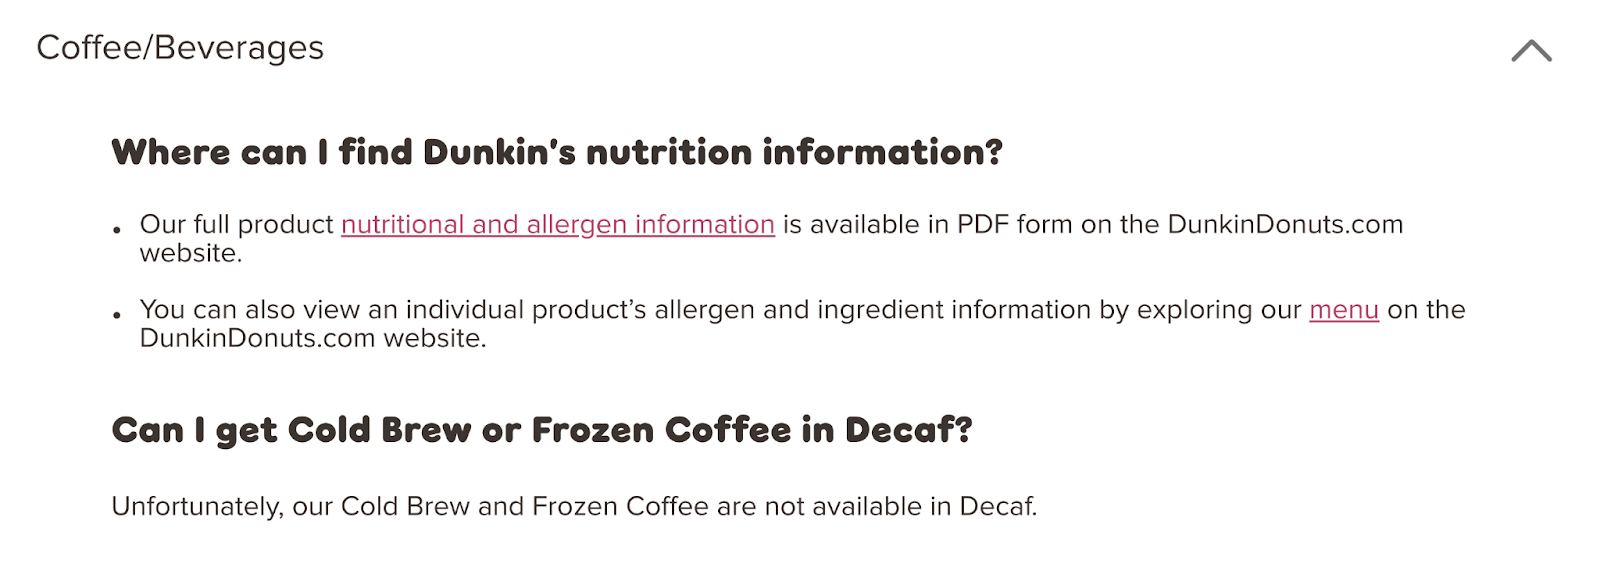 Dunkin donuts is direct in their response to faqs. For example: Dunkin responds to "Can I get cold brew or frozen coffee in decaf?" by saying "Unfortunately, our cold brew and frozen coffee are not available in decaf"